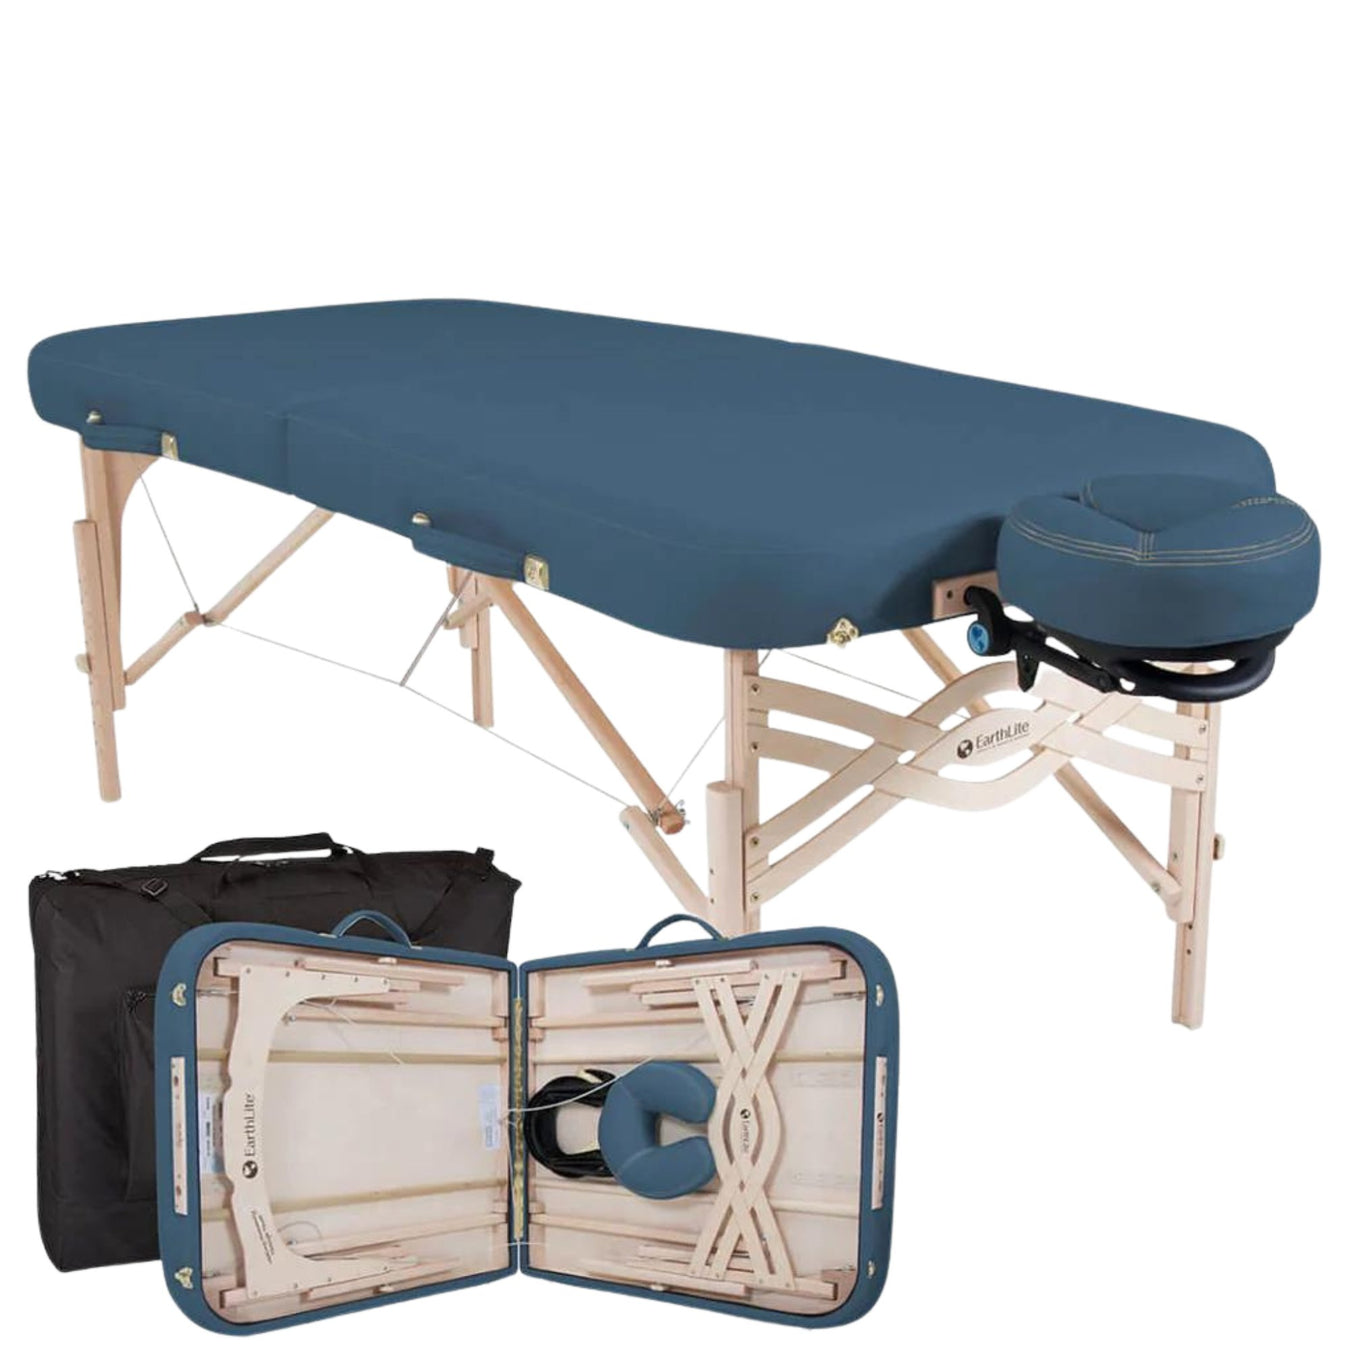 All treatment tables: Electric, Stationary, Portable, Spa, Chiropractic, + MORE